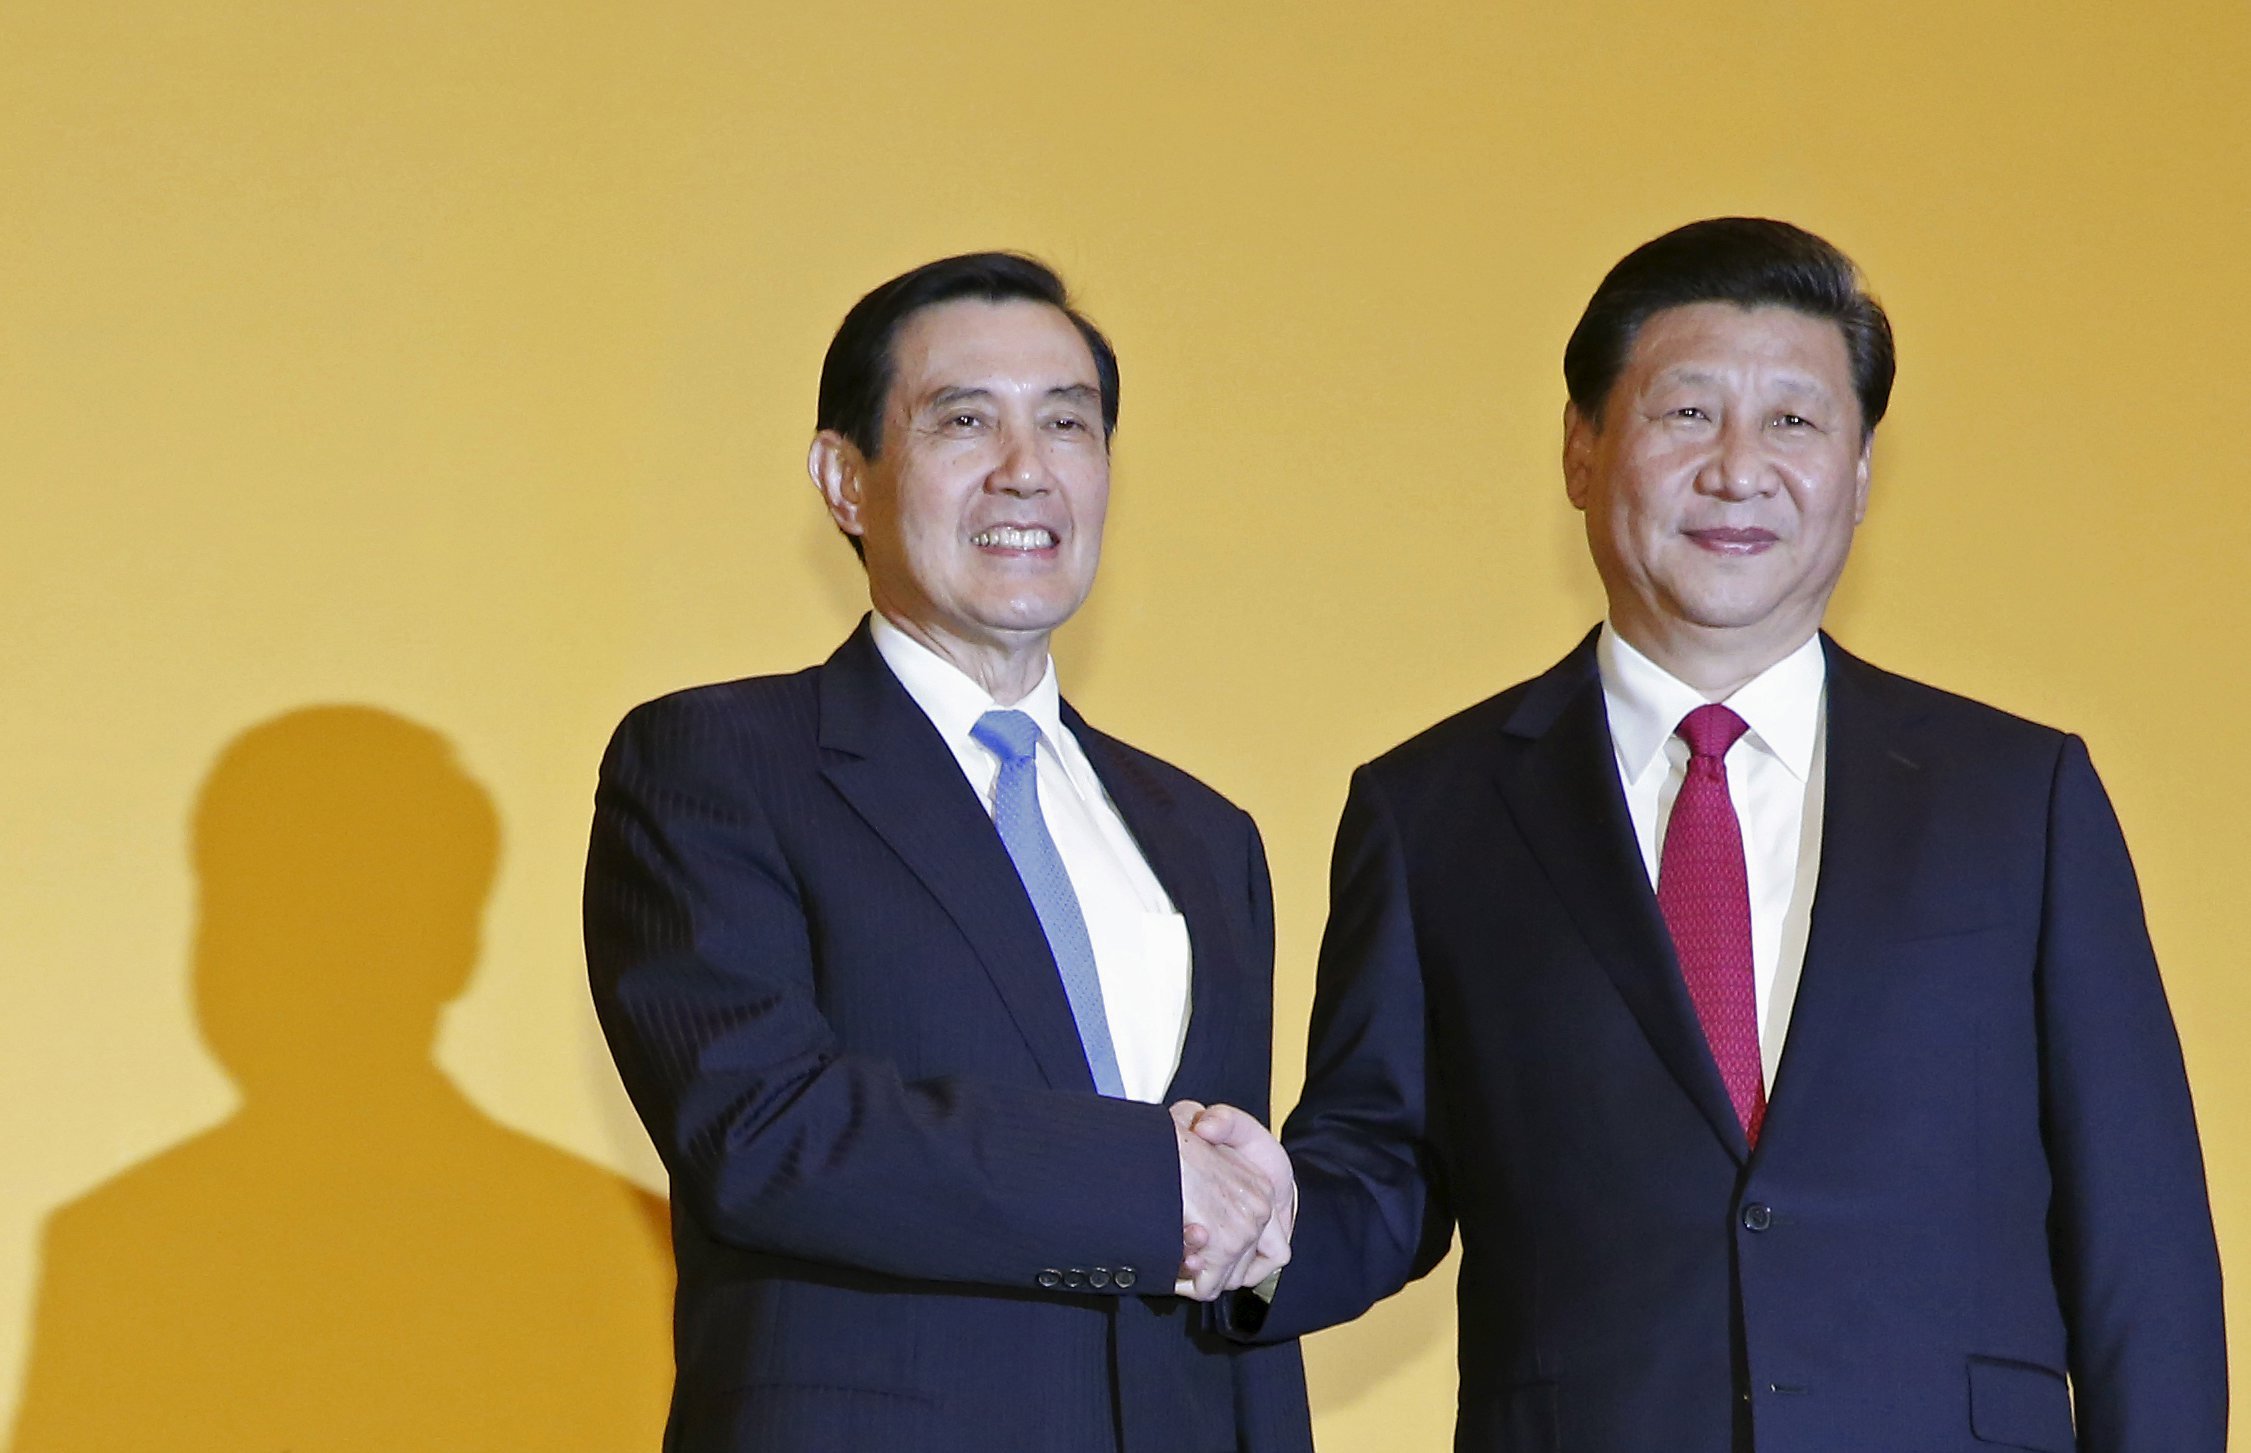 Taiwanese leader Ma Ying-jeou (left) with Chinese President Xi Jinping shake hands ahead of their meeting in Singapore on November 7. Photo: Reuters